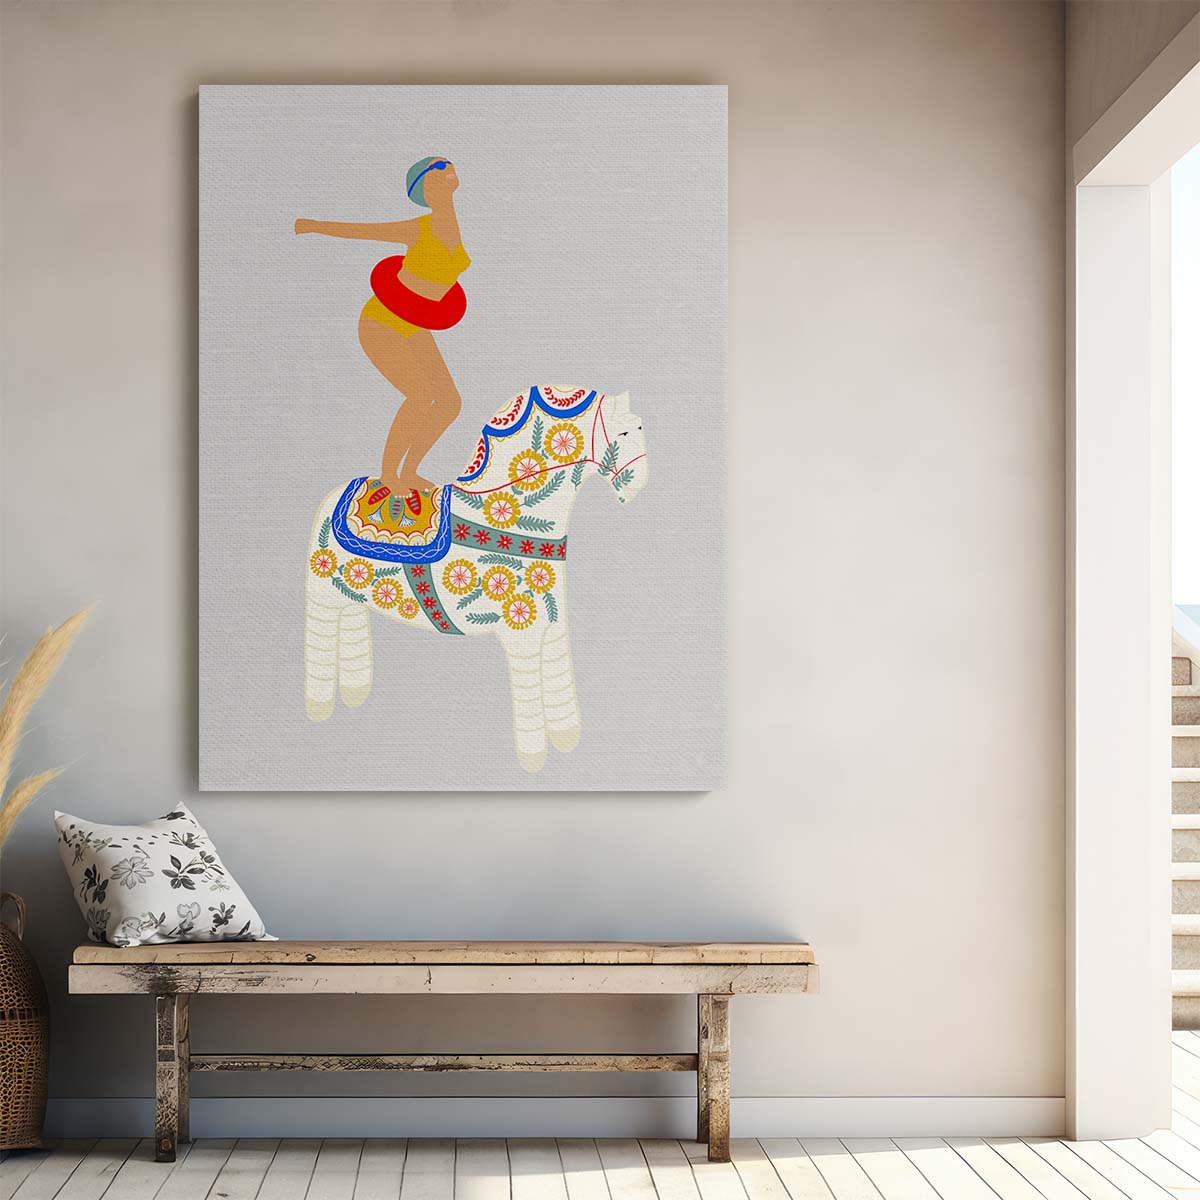 Surreal Equestrian Swimming Illustration Wall Art by Jota de Jai by Luxuriance Designs, made in USA